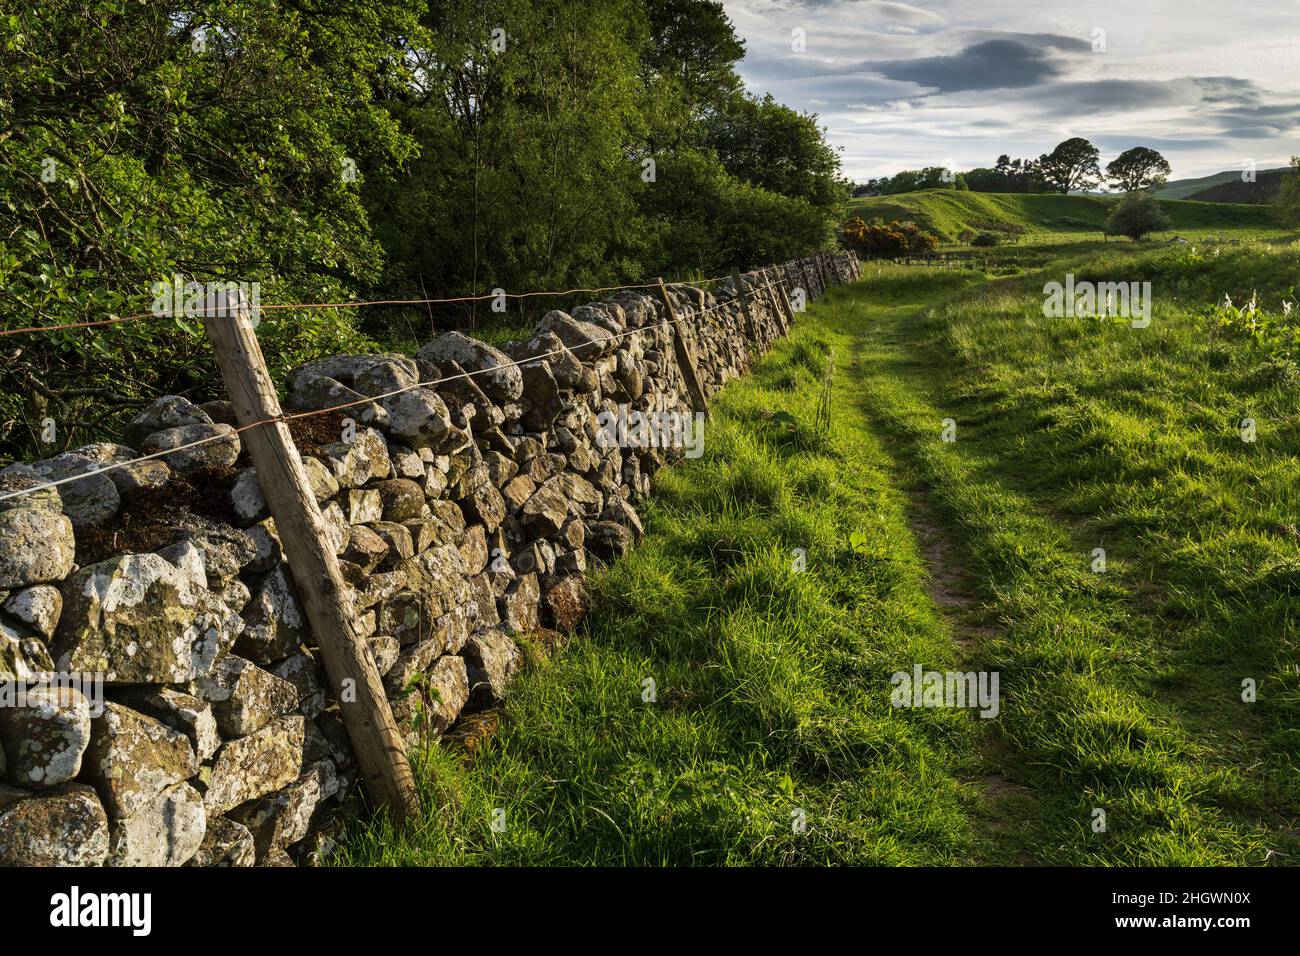 Hethpool, near Wooler, Northumberland - College Valley, Cheviot foothills. Drystone wall. Stock Photo